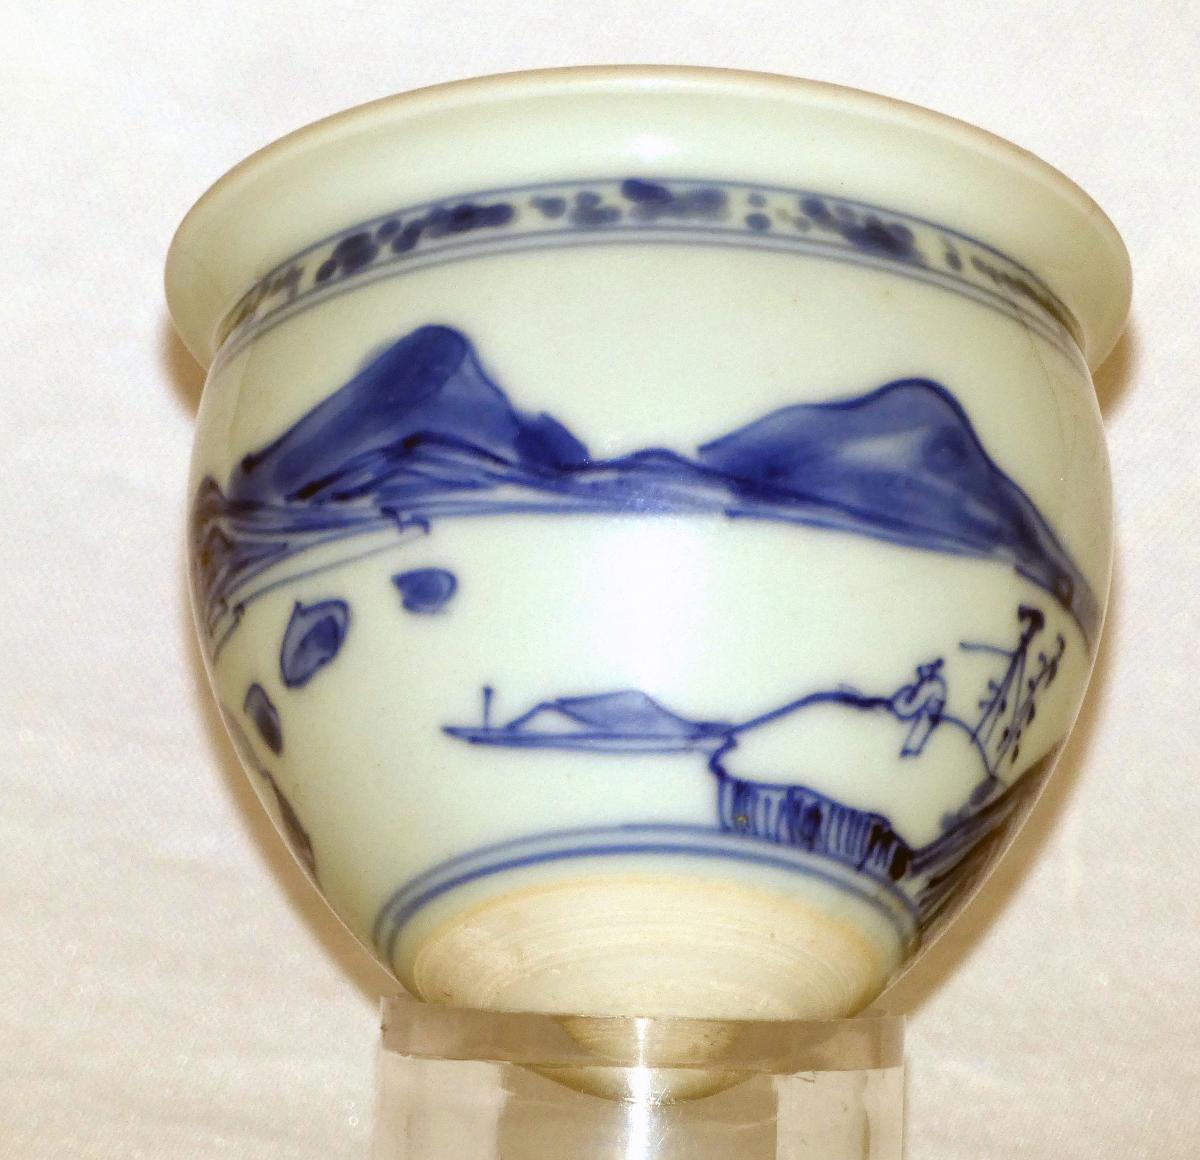 Transitional Blue and White Conical Cup